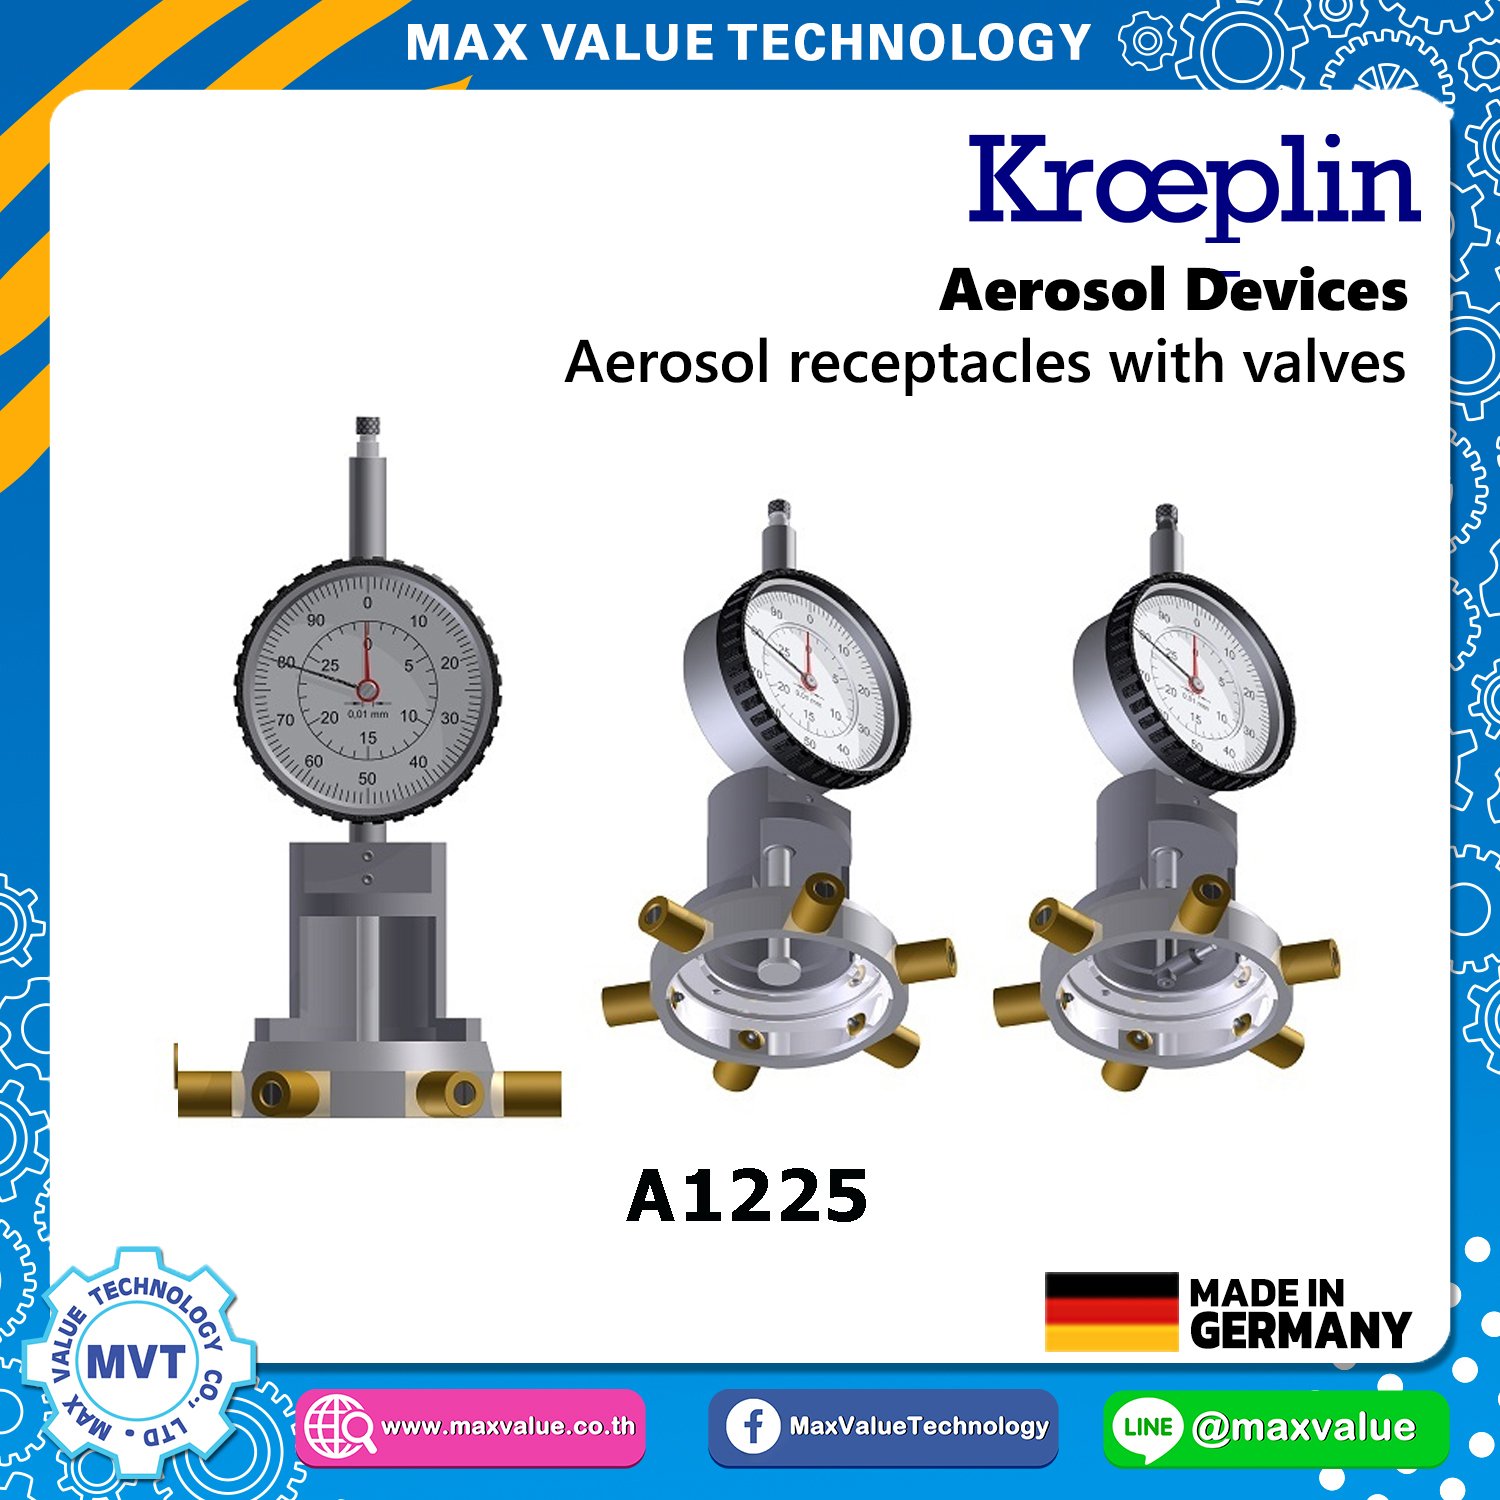 A1225/AE1225 - Aerosol devices - Aerosol receptacles with valves